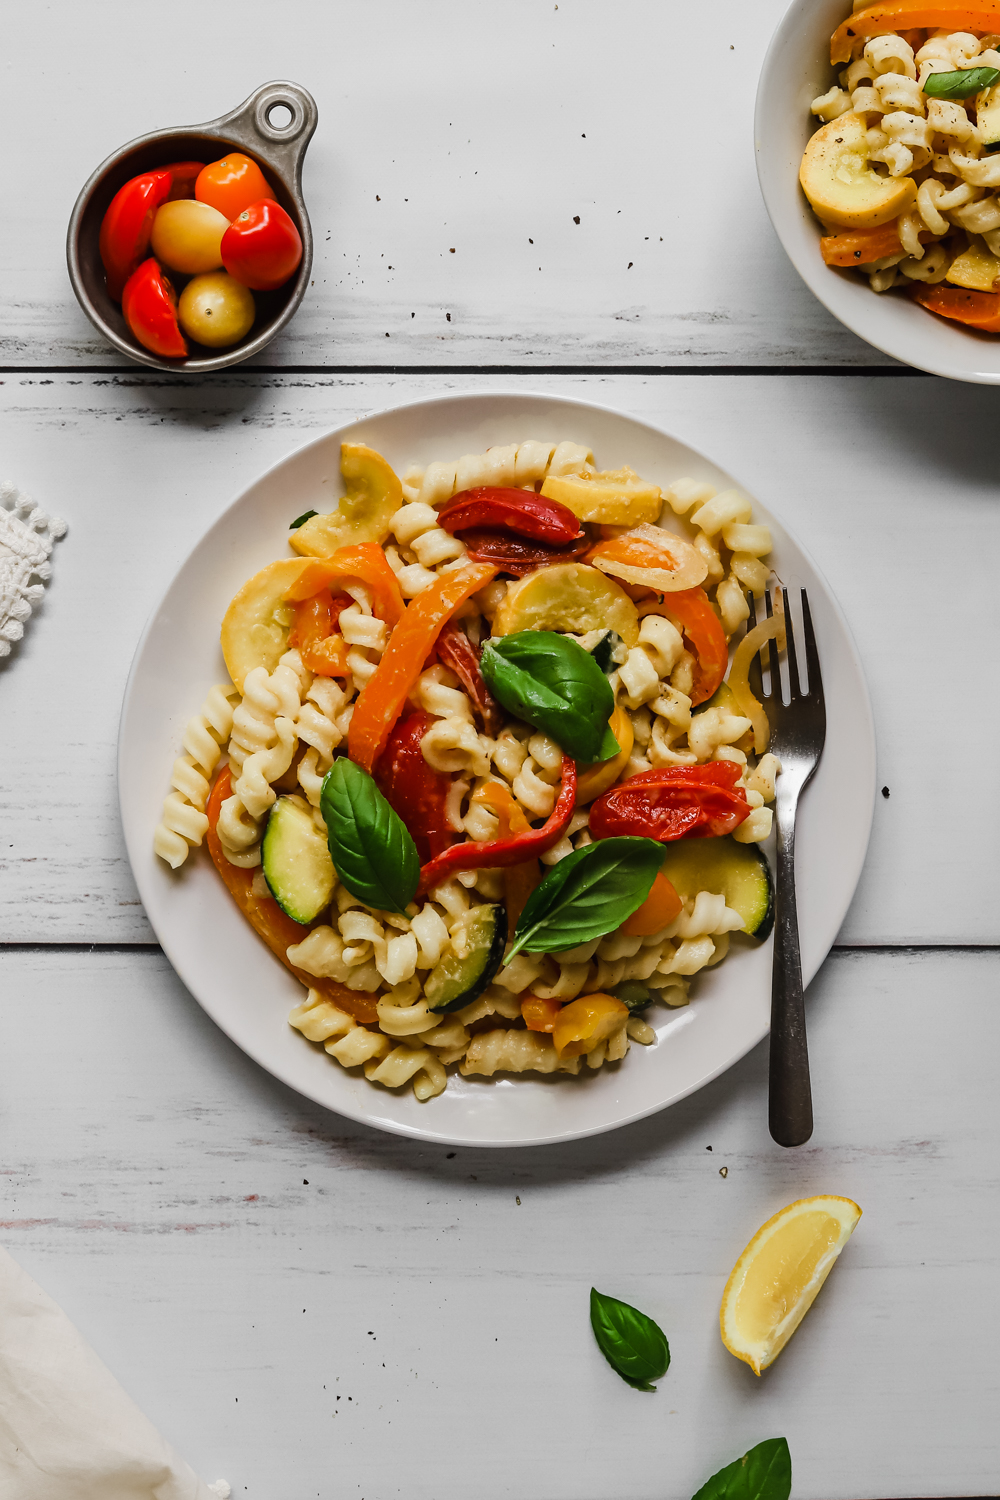 Creamy vegan pasta and sauteed summer veggies topped with fresh basil on a white plate.